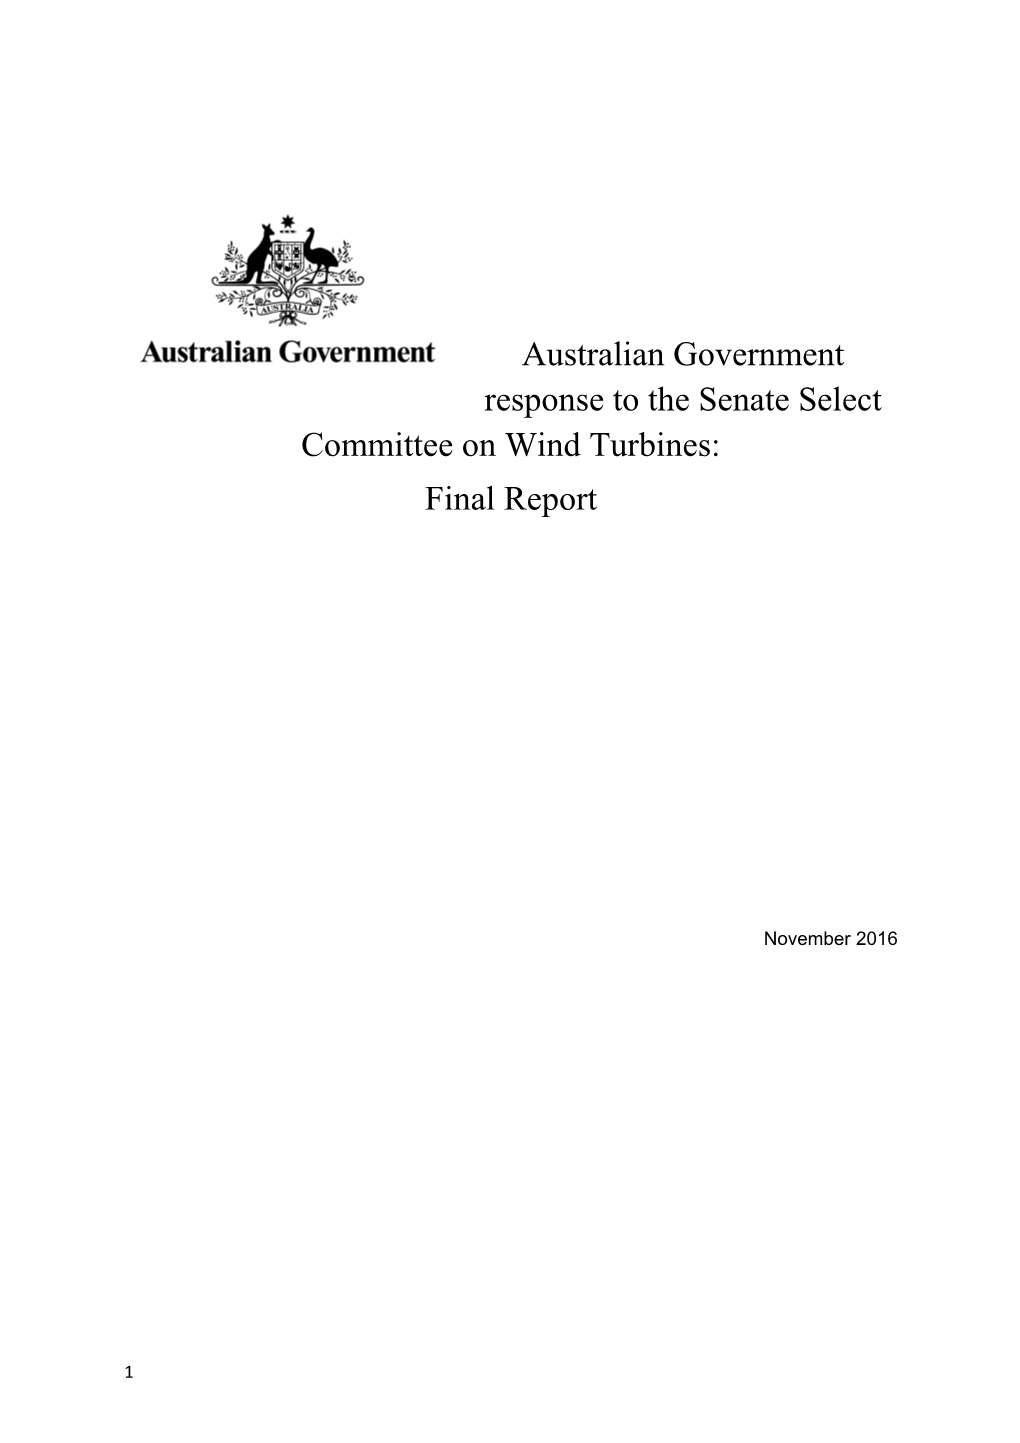 MS16-001224 - Attachment a - Revised Draft Government Response